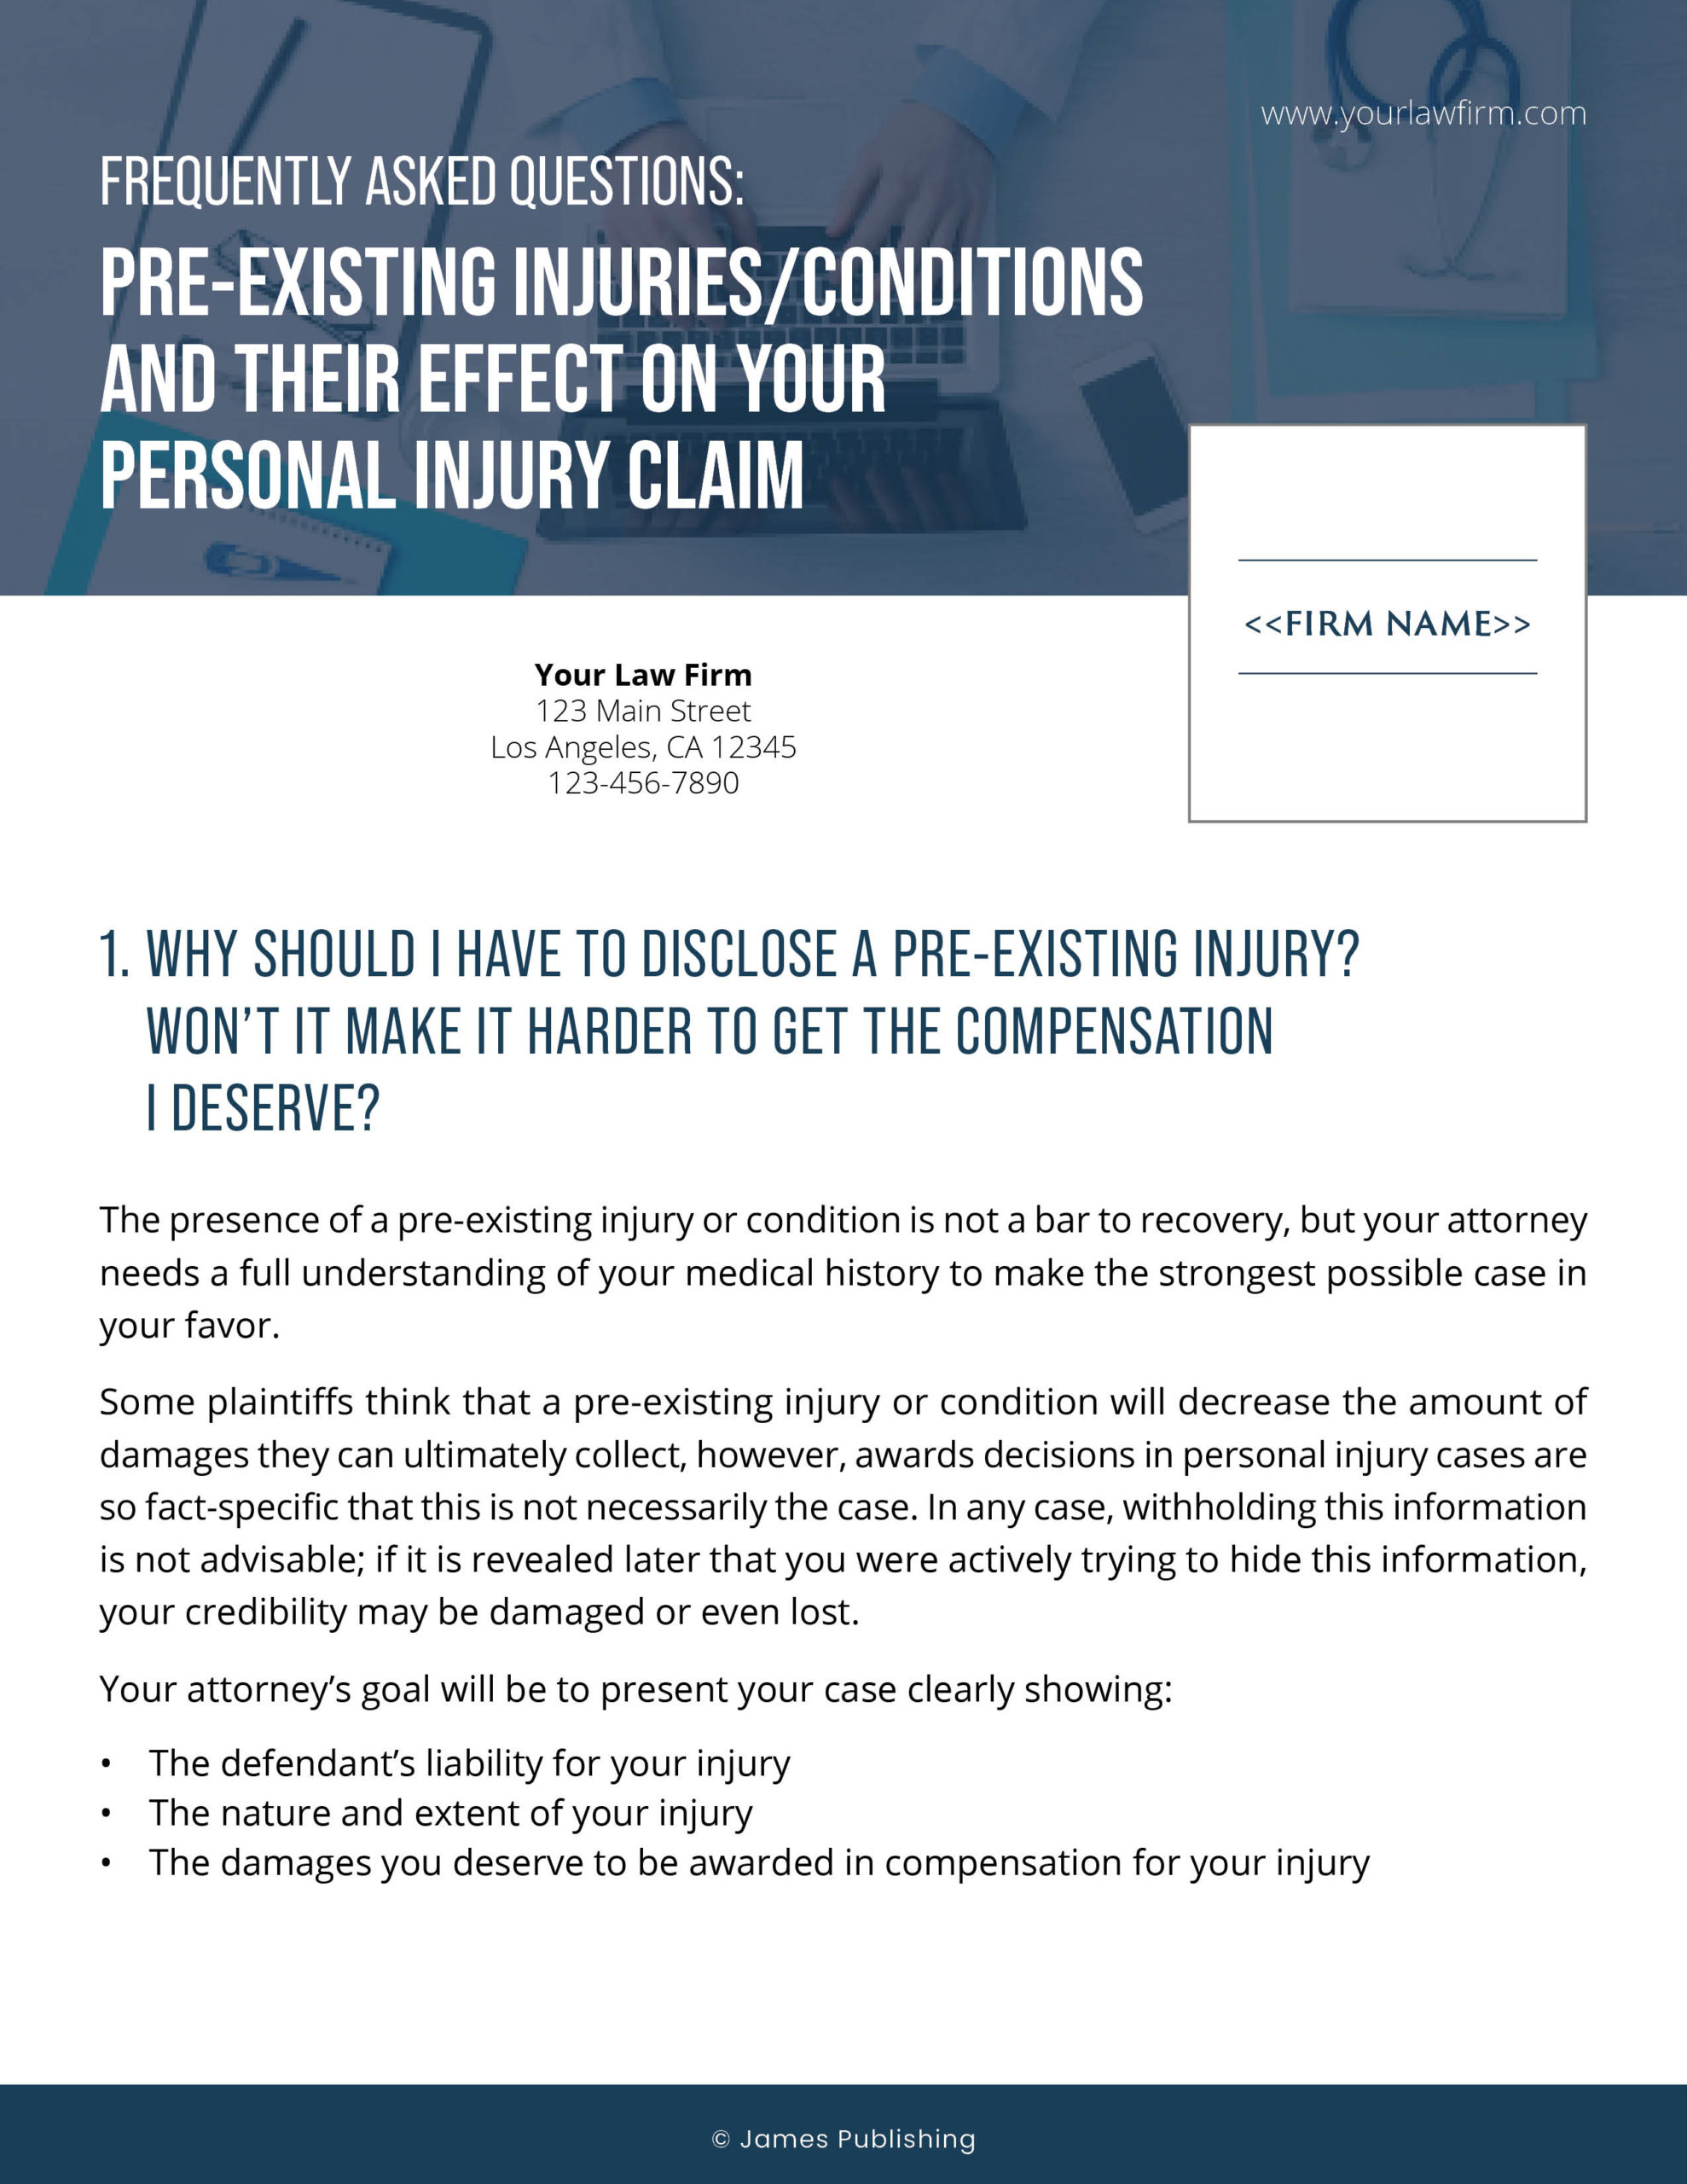 PI-18 How a Pre-Existing Injury Can Affect Your Case